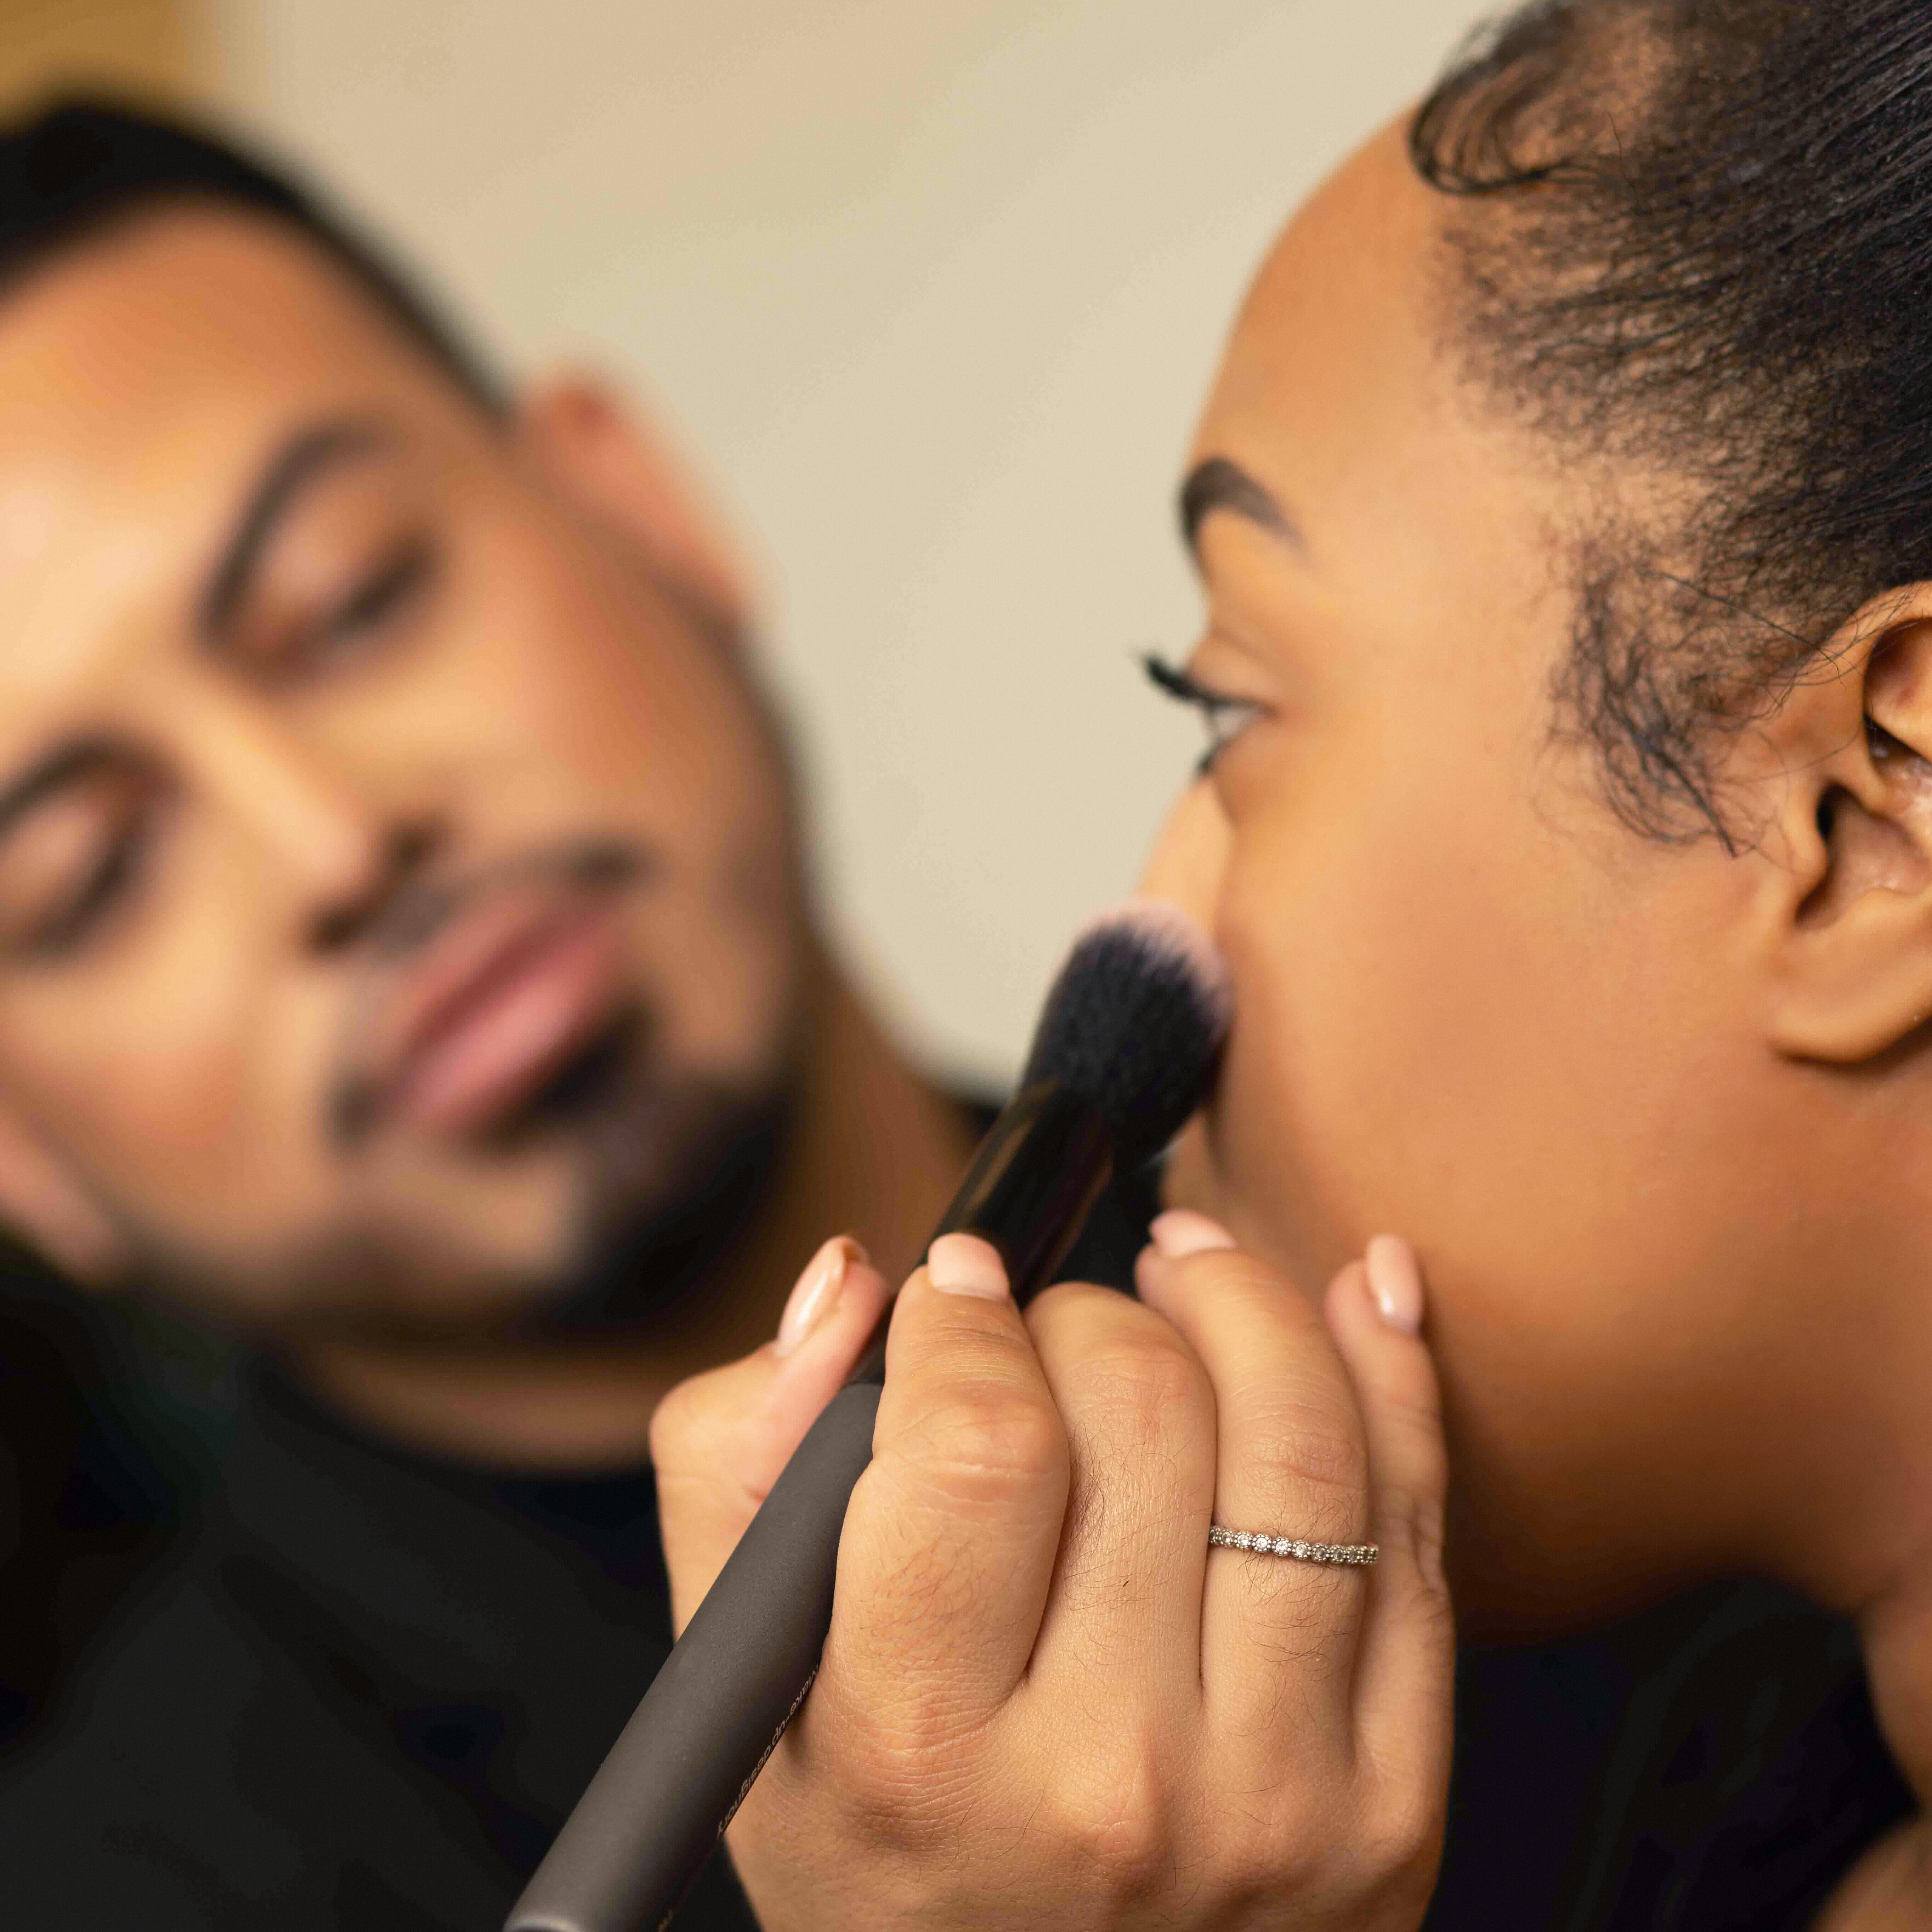 Esthetician school student in an esthetician training program applying make-up to a client